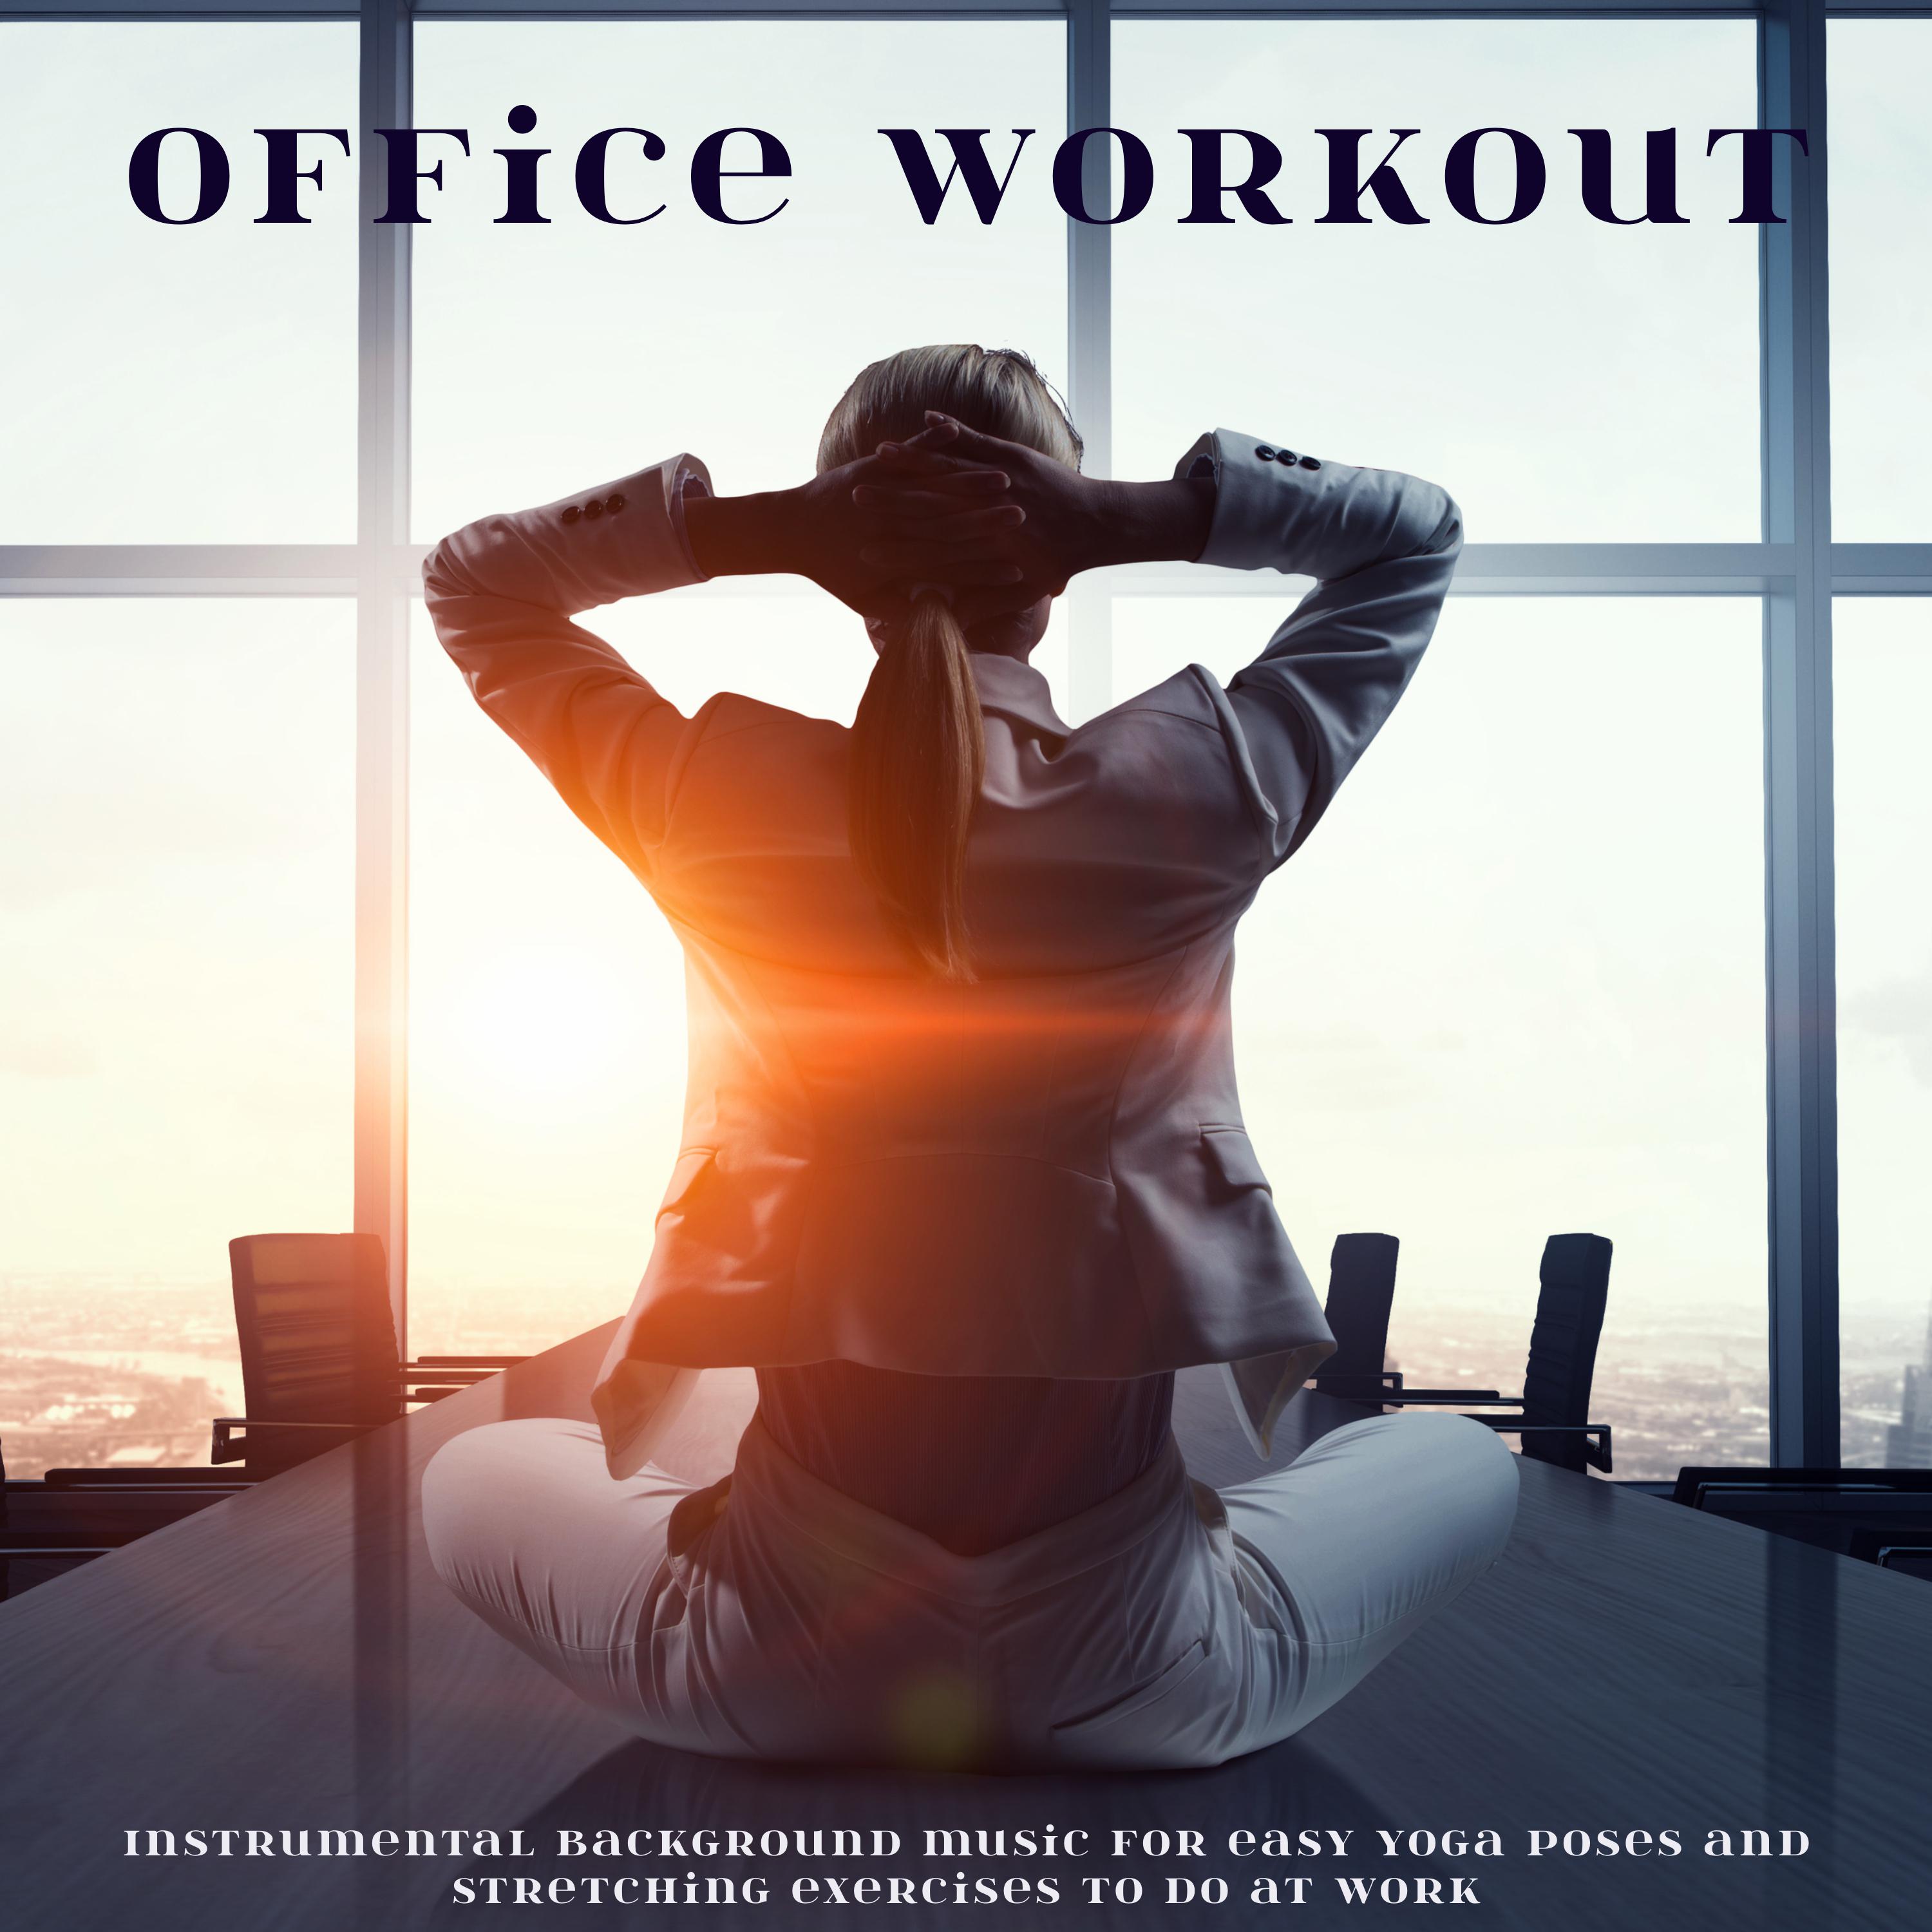 Office Workout – Instrumental Background Music for Easy Yoga Poses and Stretching Exercises to Do at Work